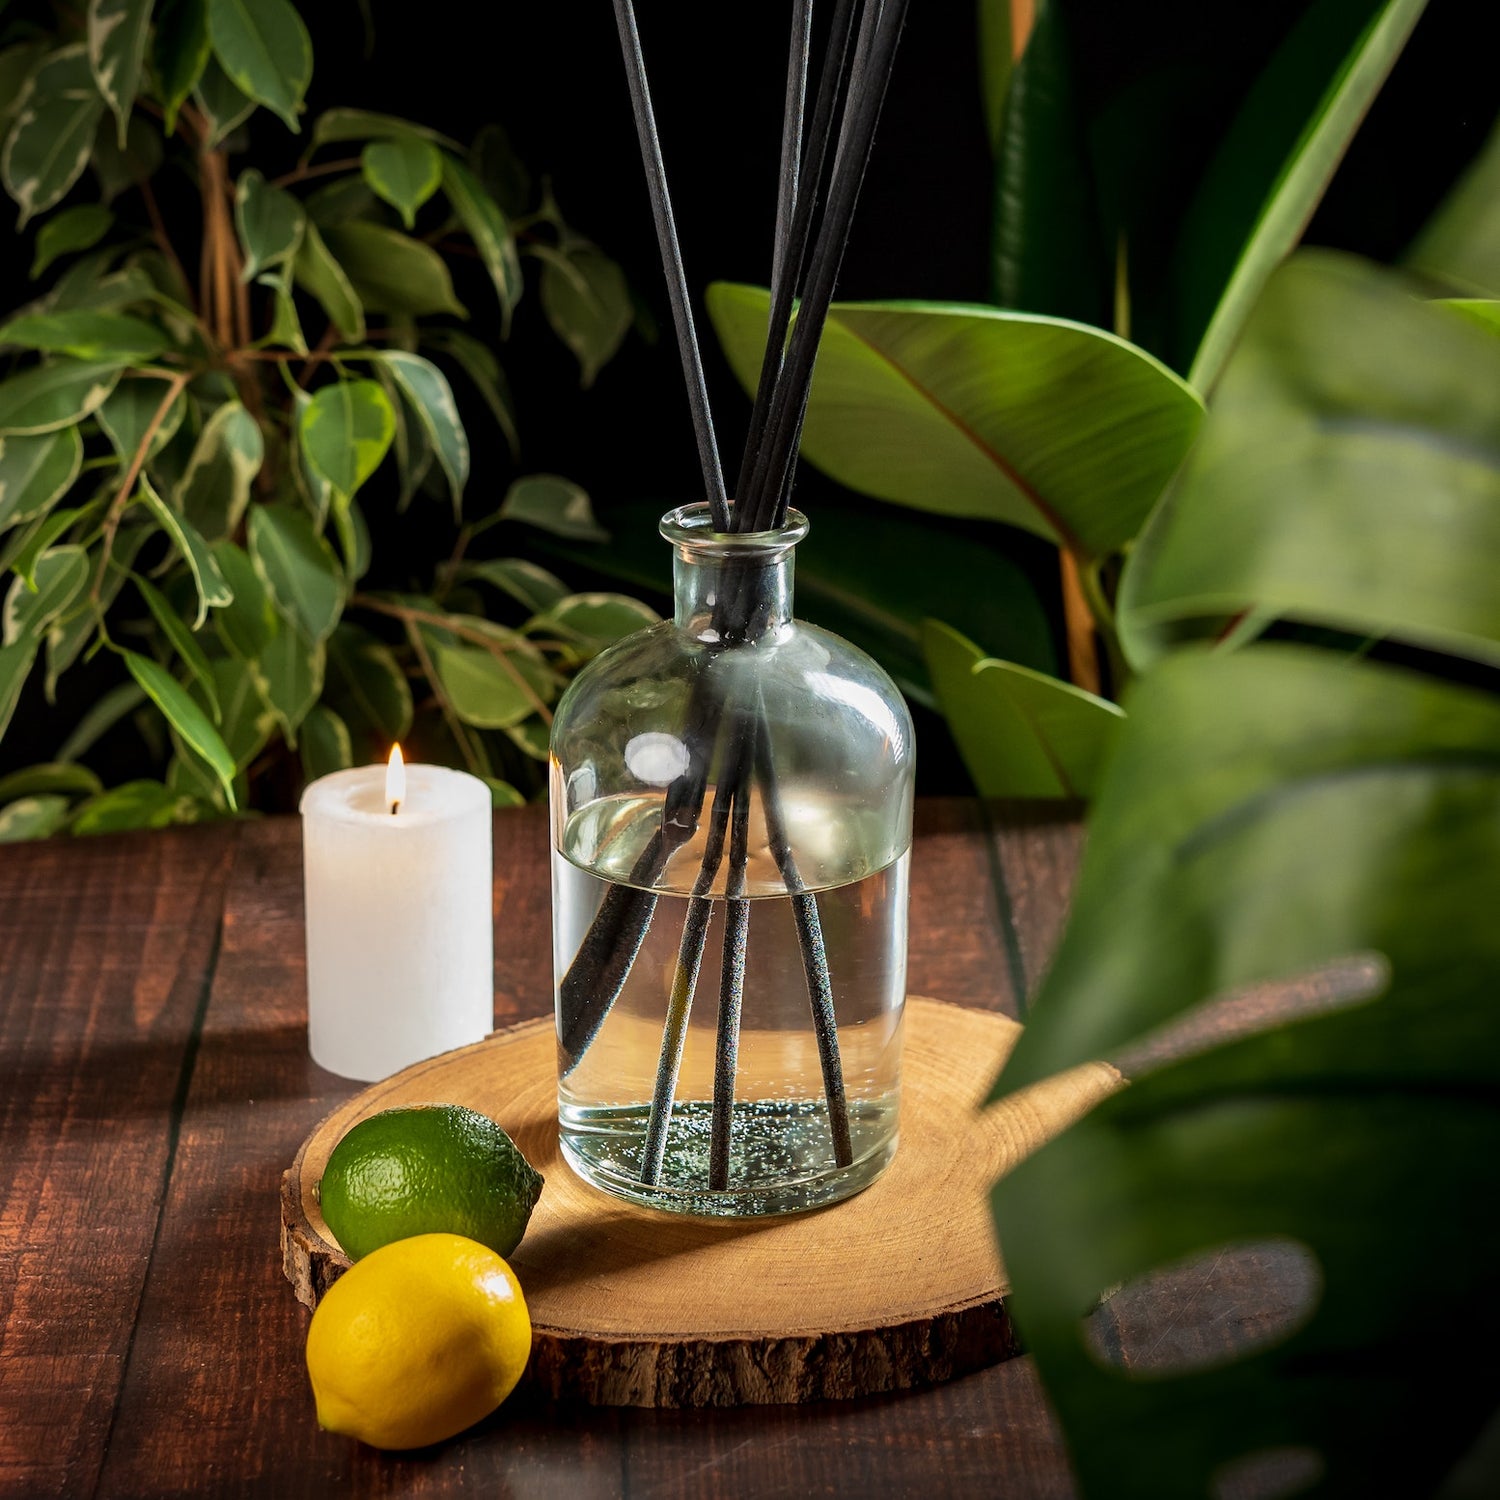 XL size 1l diffuser with lemon and lime in foreground. Diffuser supplies, how to make a diffuser.